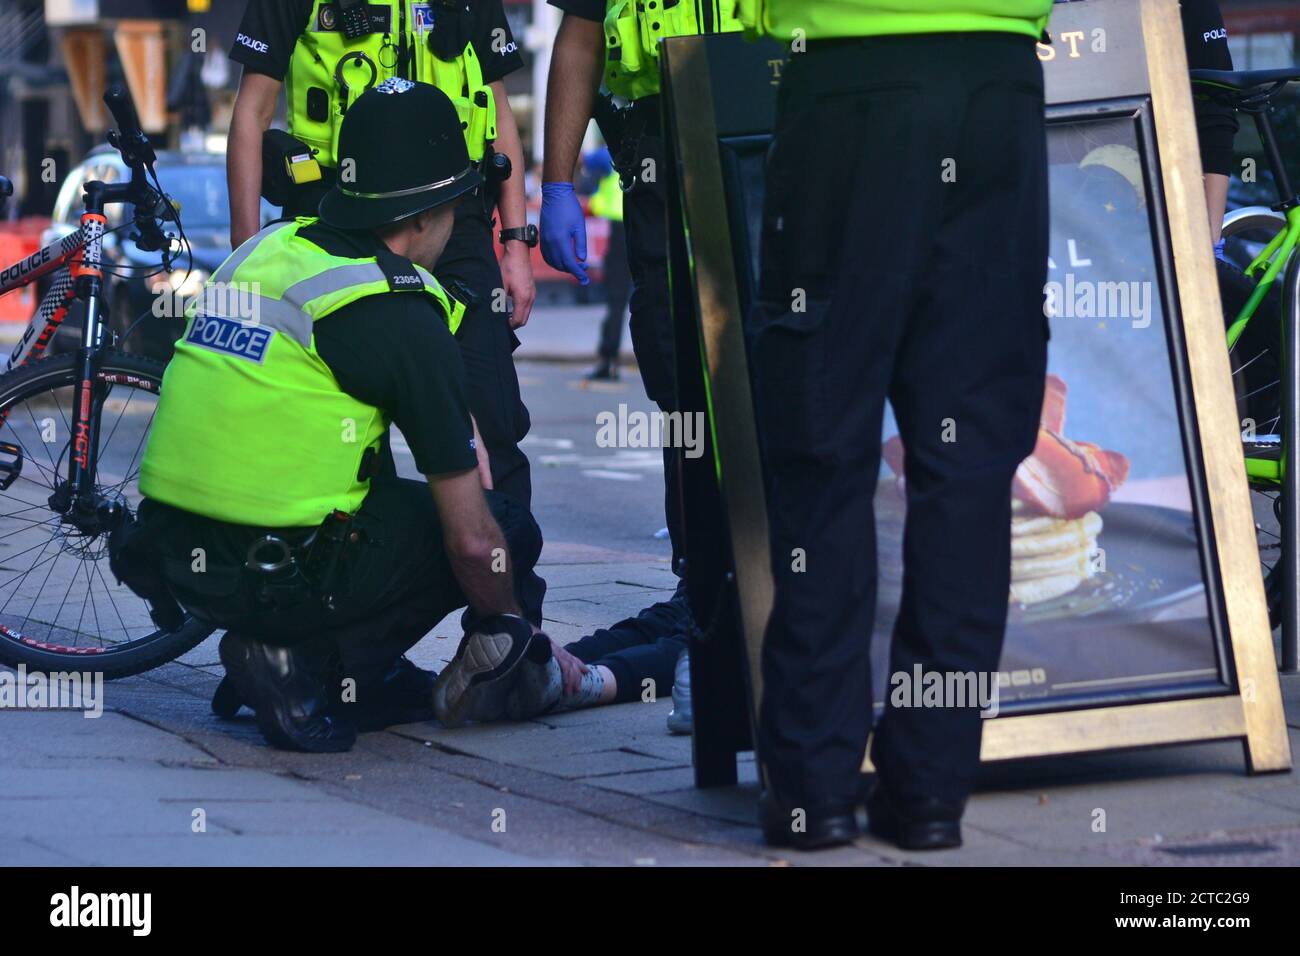 Birmingham, United Kingdom - September 8, 2020: West Midlands Police detain a violent man on Colmore Row two days after a major stabbing incident Stock Photo